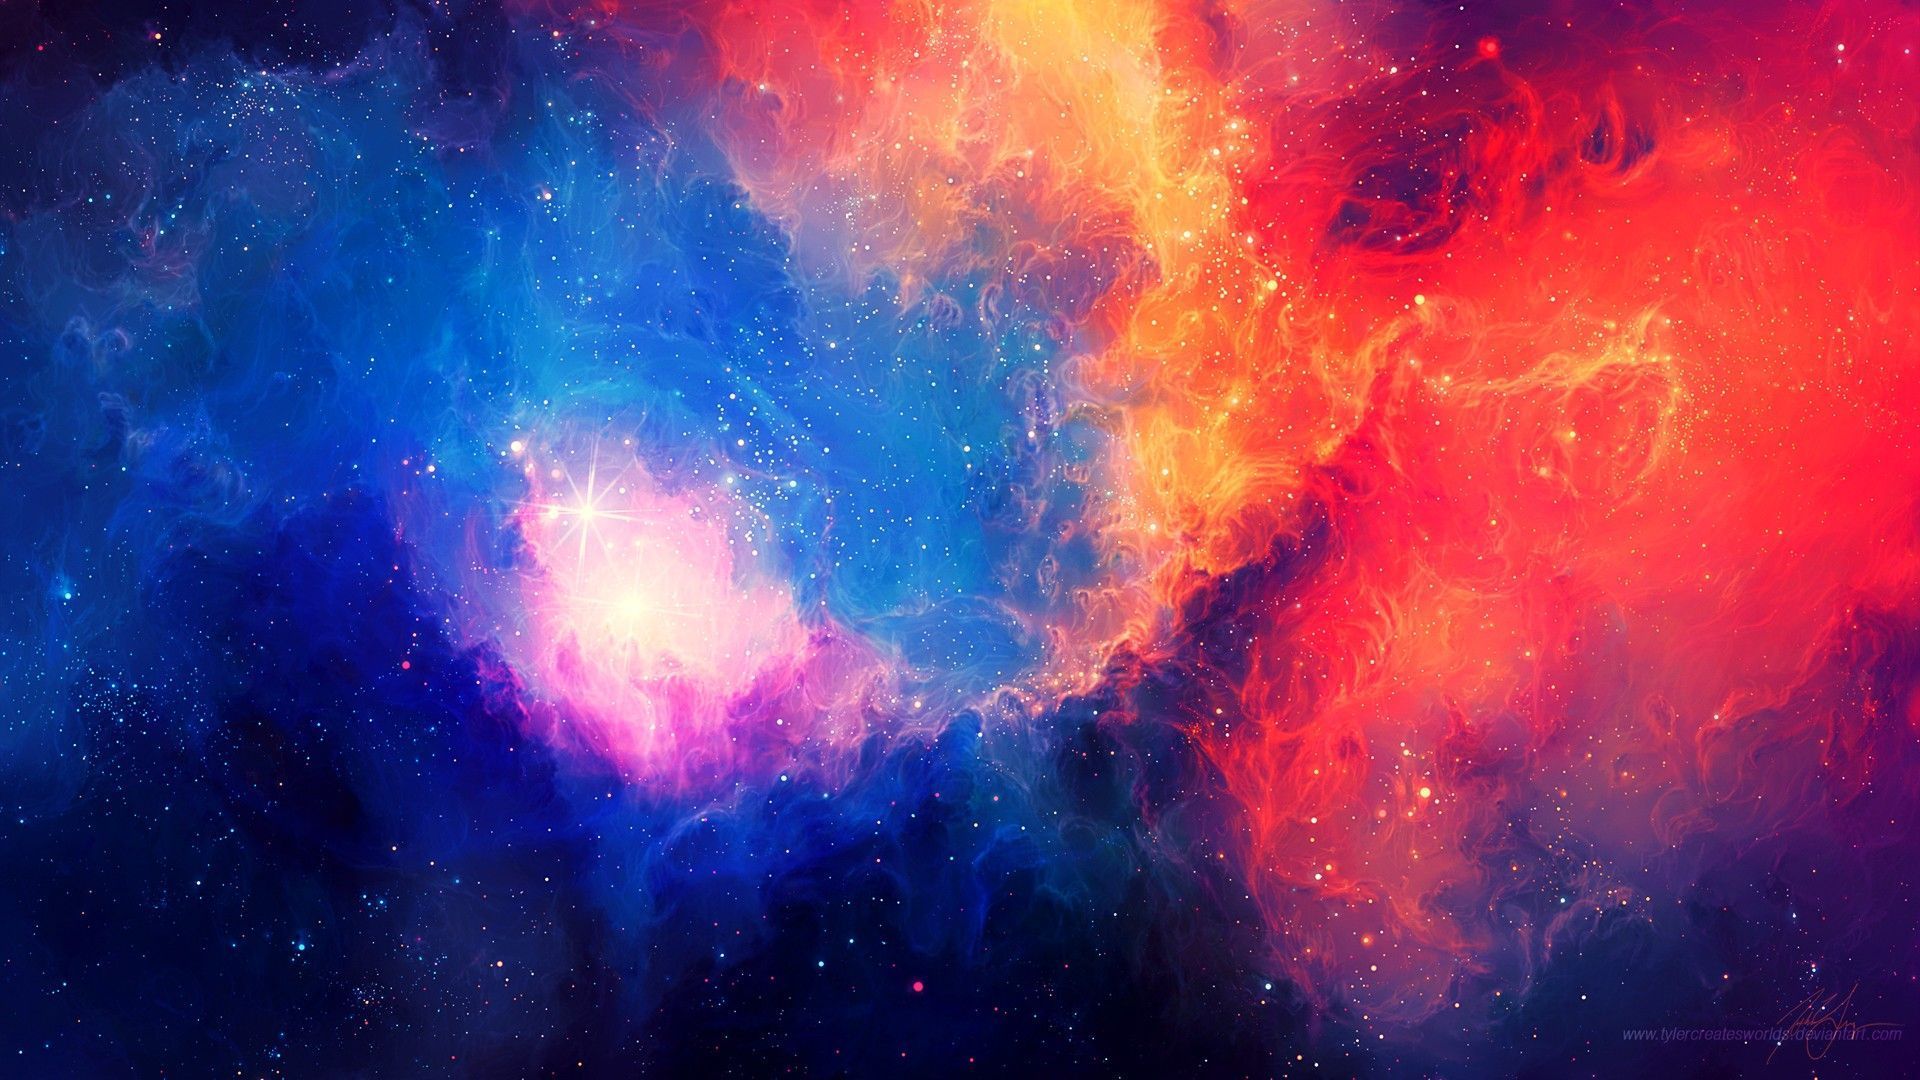 Download Colorful Galaxy Wallpaper Images #aDWHo » wallpincuk.com